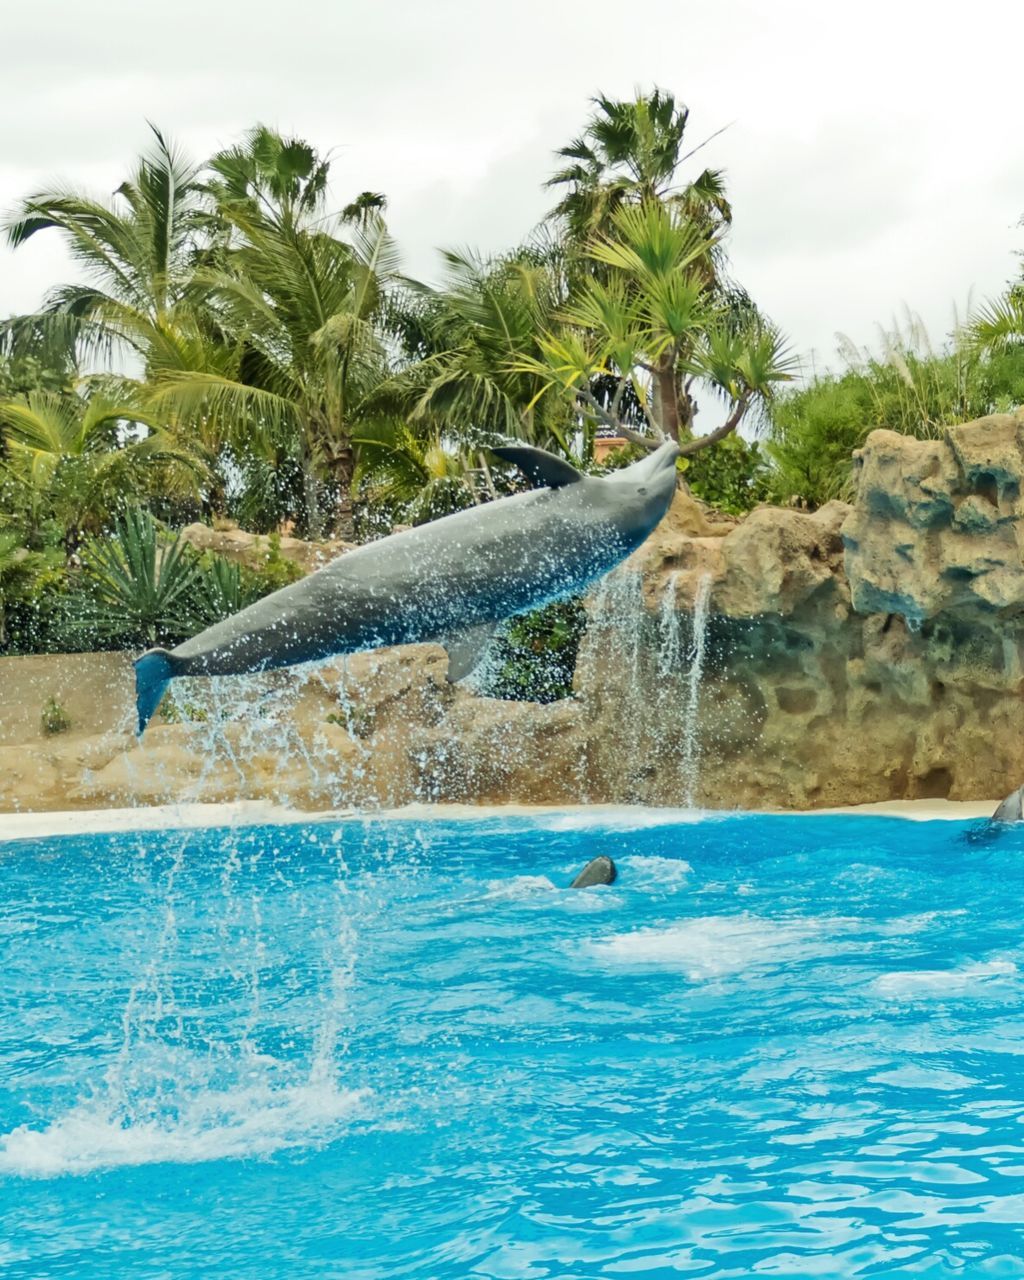 Dolphin in water against palm trees